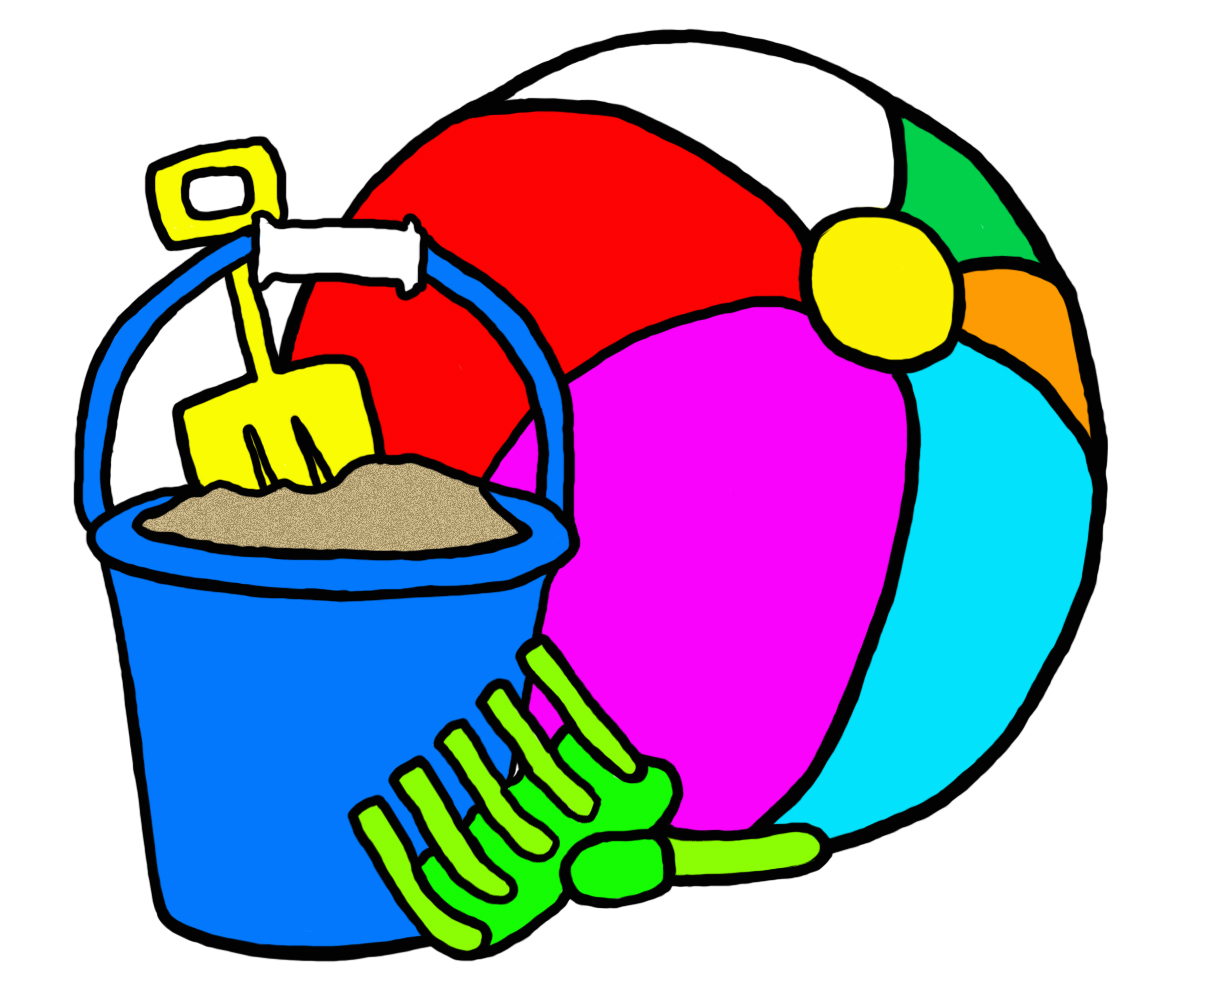 Sand Bucket Clipart Black And White - Free Clipart ...